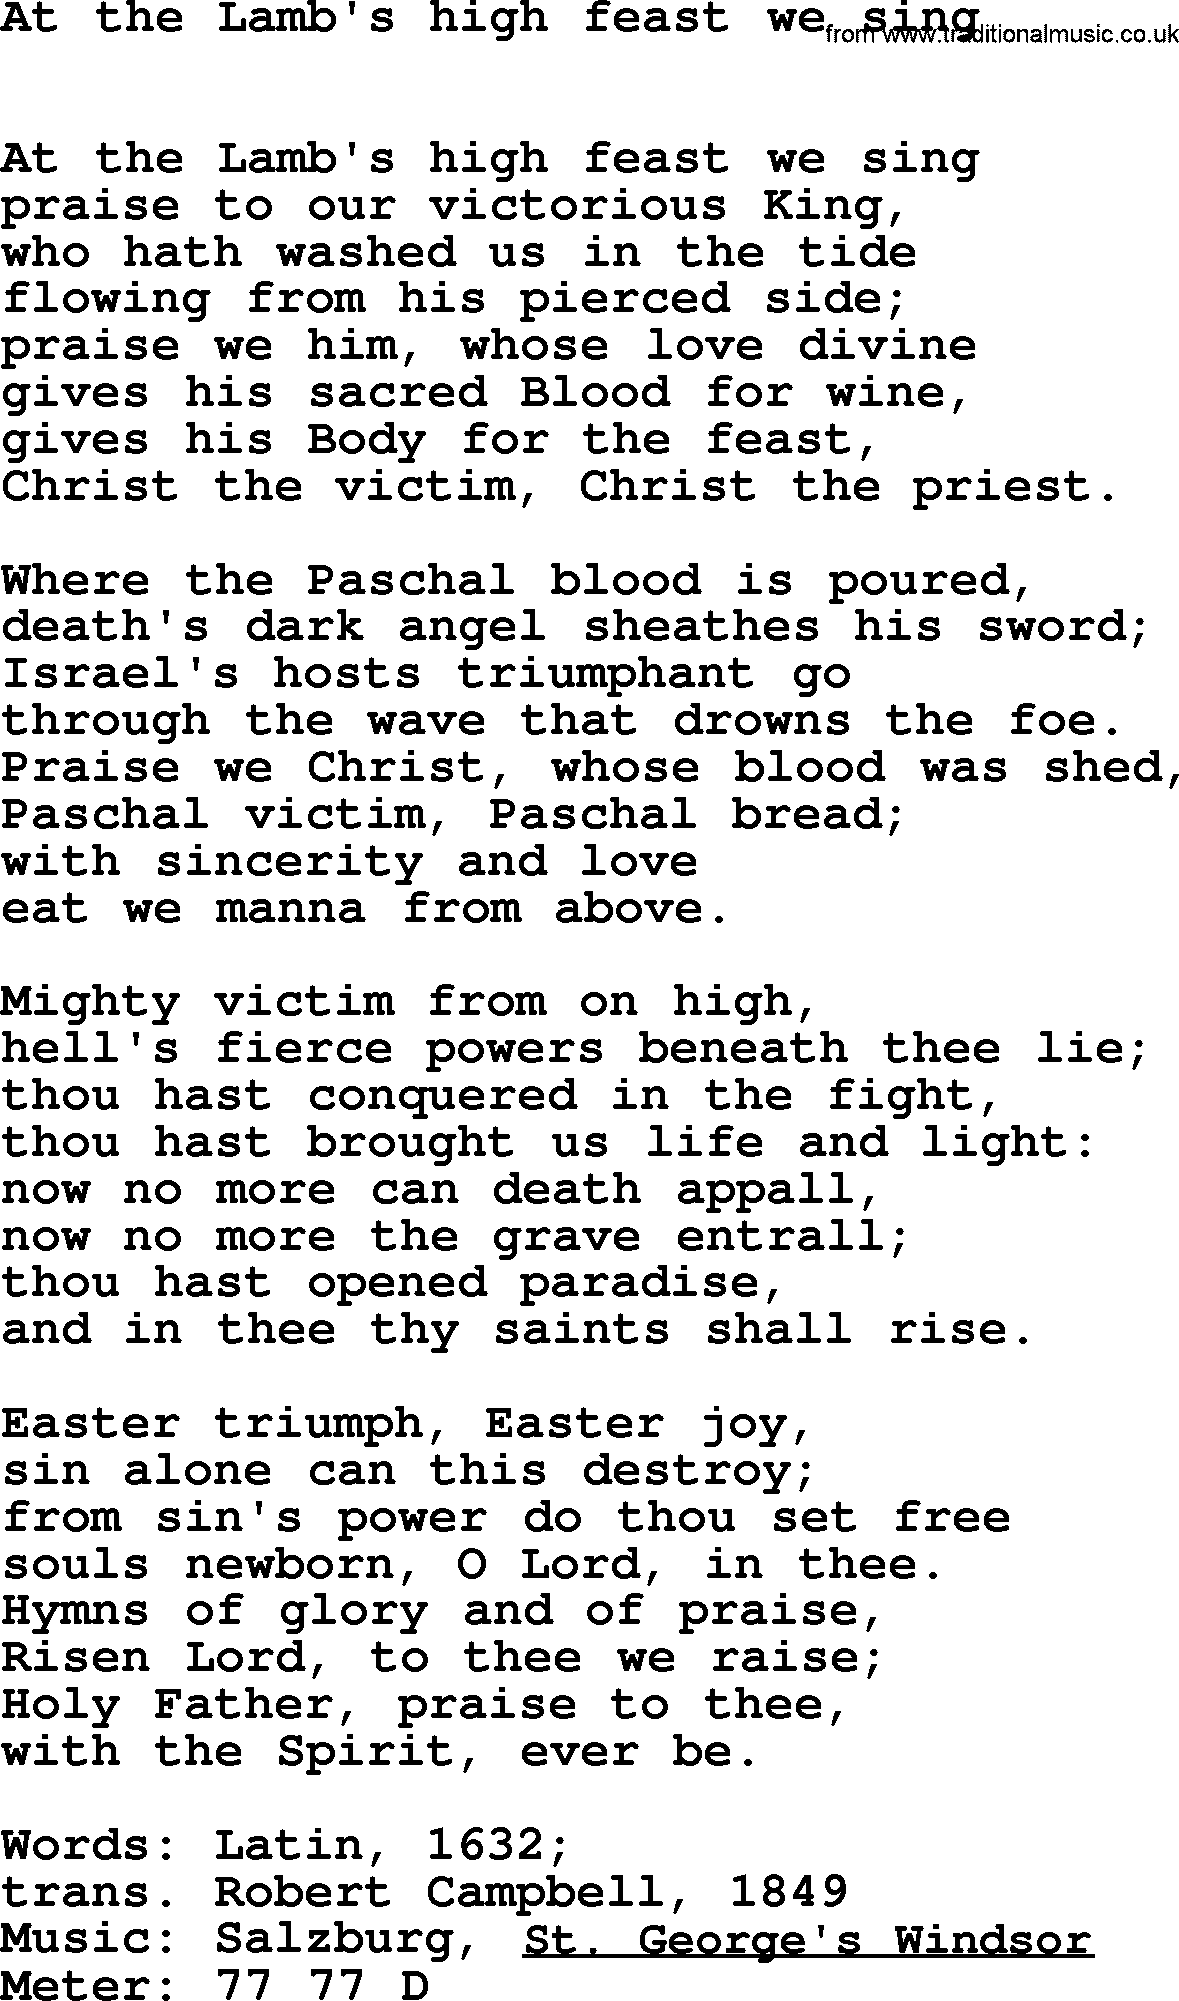 Hymns Ancient and Modern Hymn: At The Lamb's High Feast We Sing, lyrics with midi music